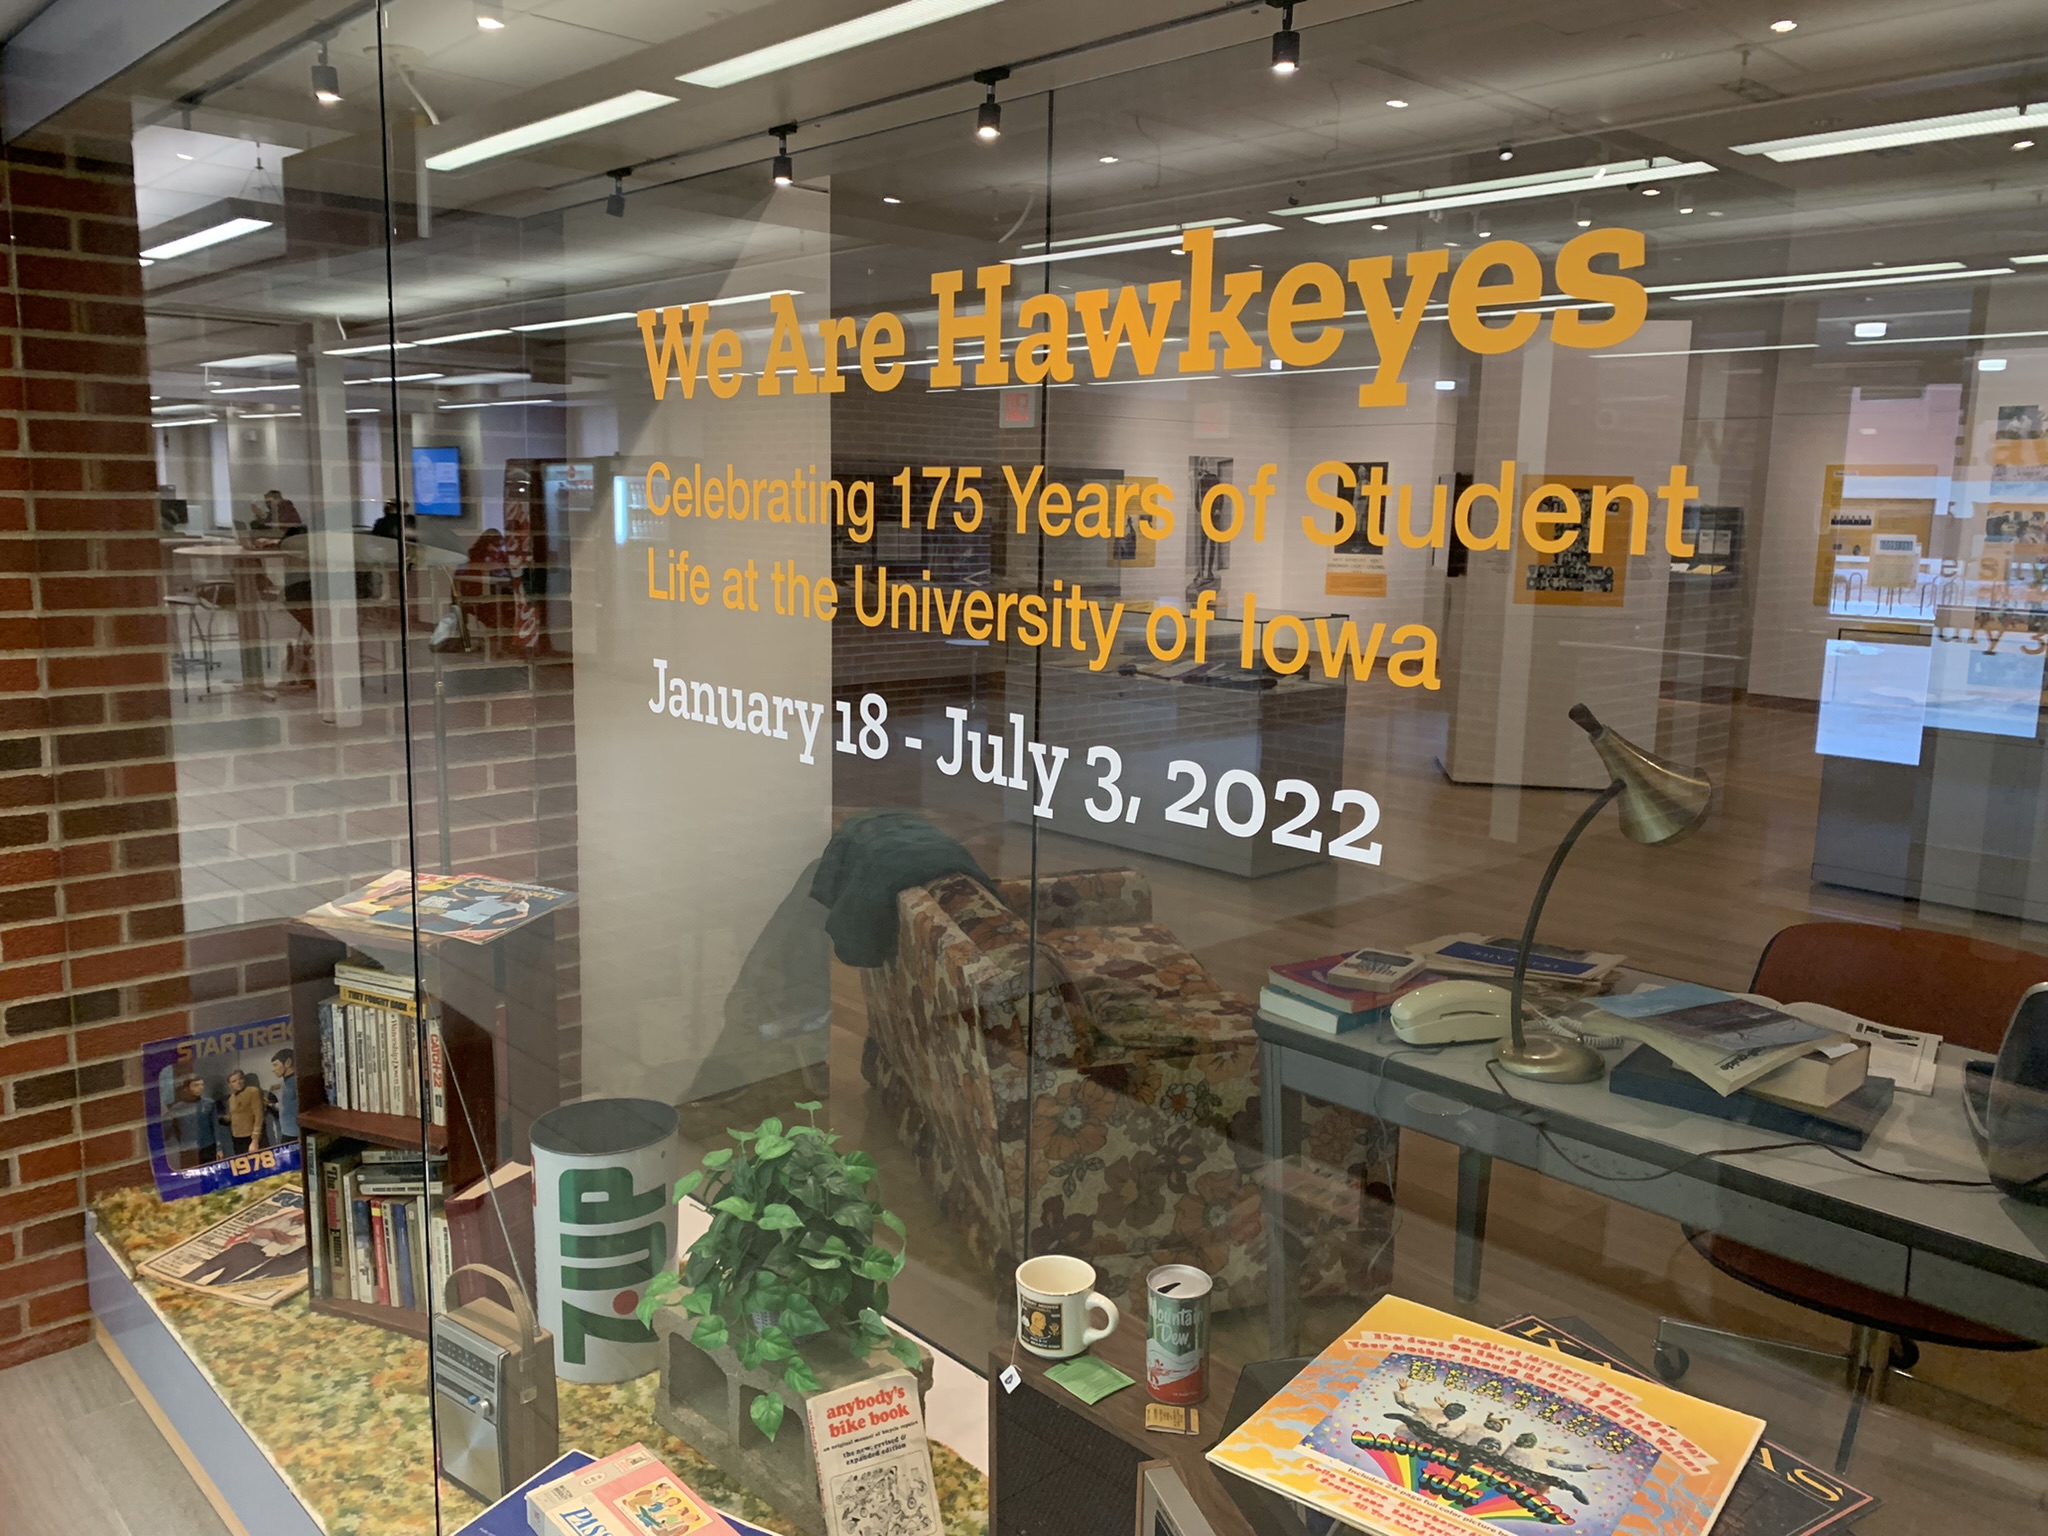 A window display is filled with vintage books, games, records, a record player, green and orange shag carpet, and more to evoke a 1970s dorm room feel. The title of the exhibit is in vinyl on the glass window.